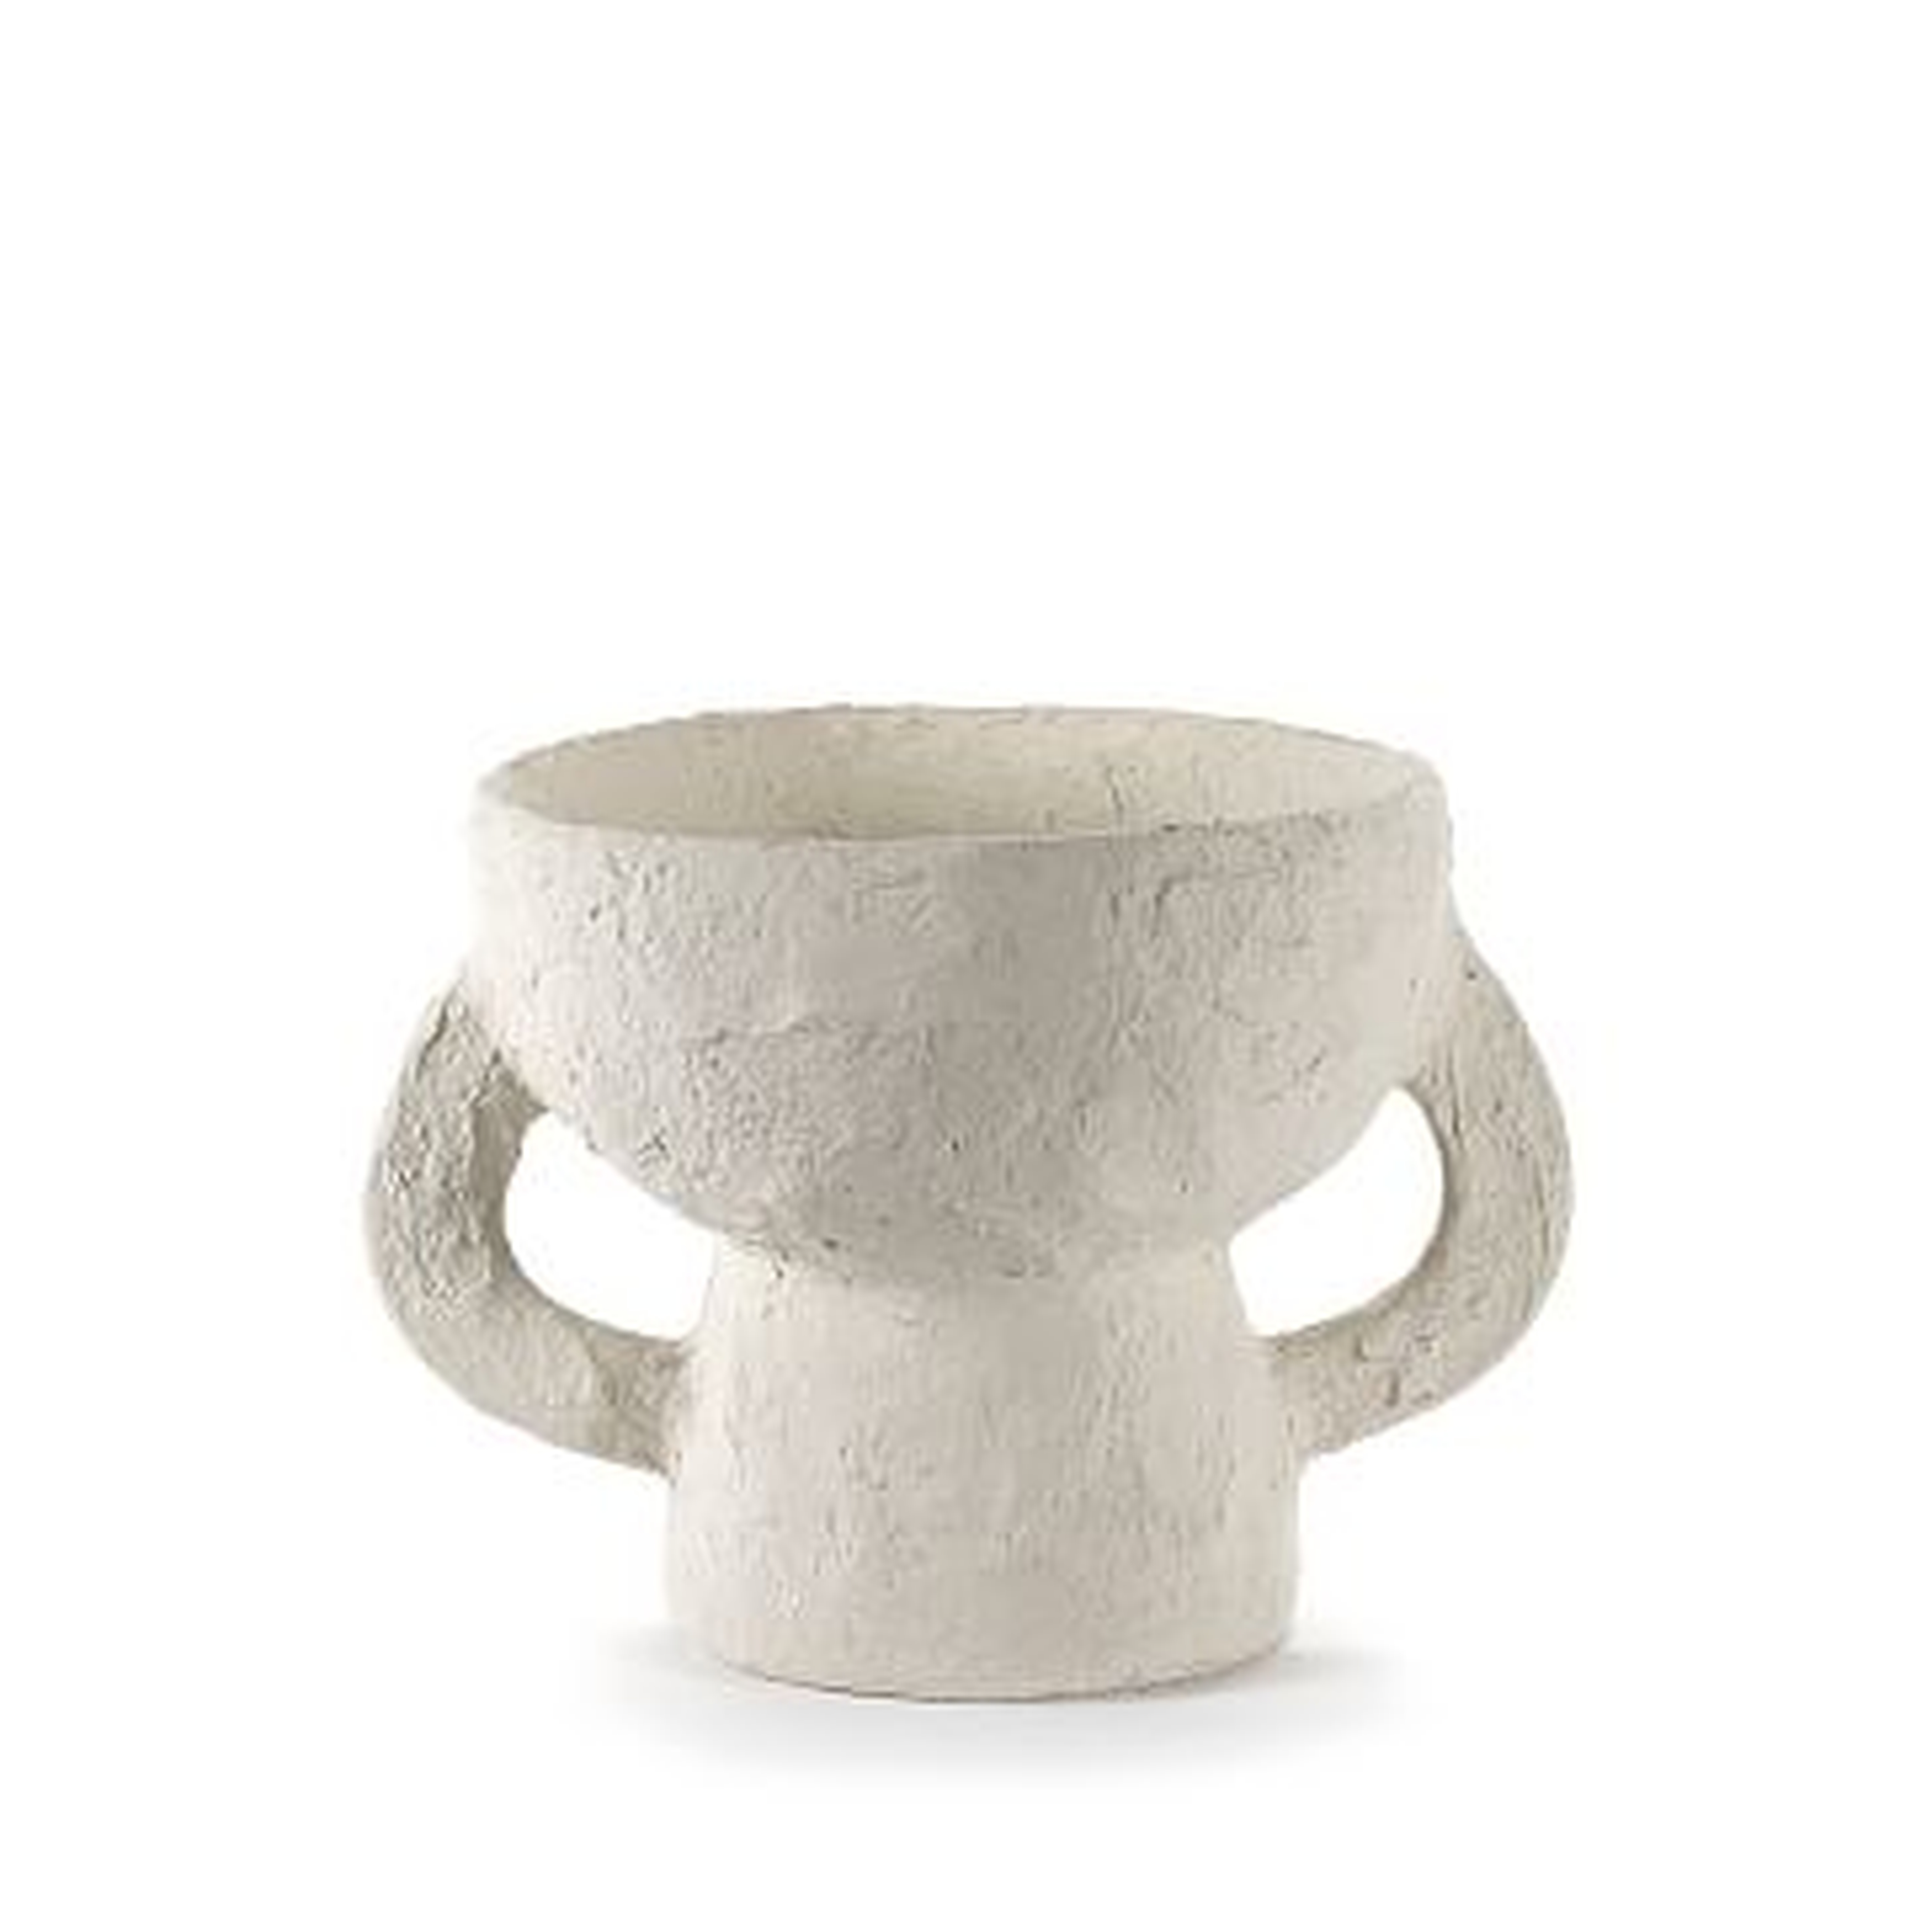 Marie Earth Paper Mache Earth Vase, Small - West Elm